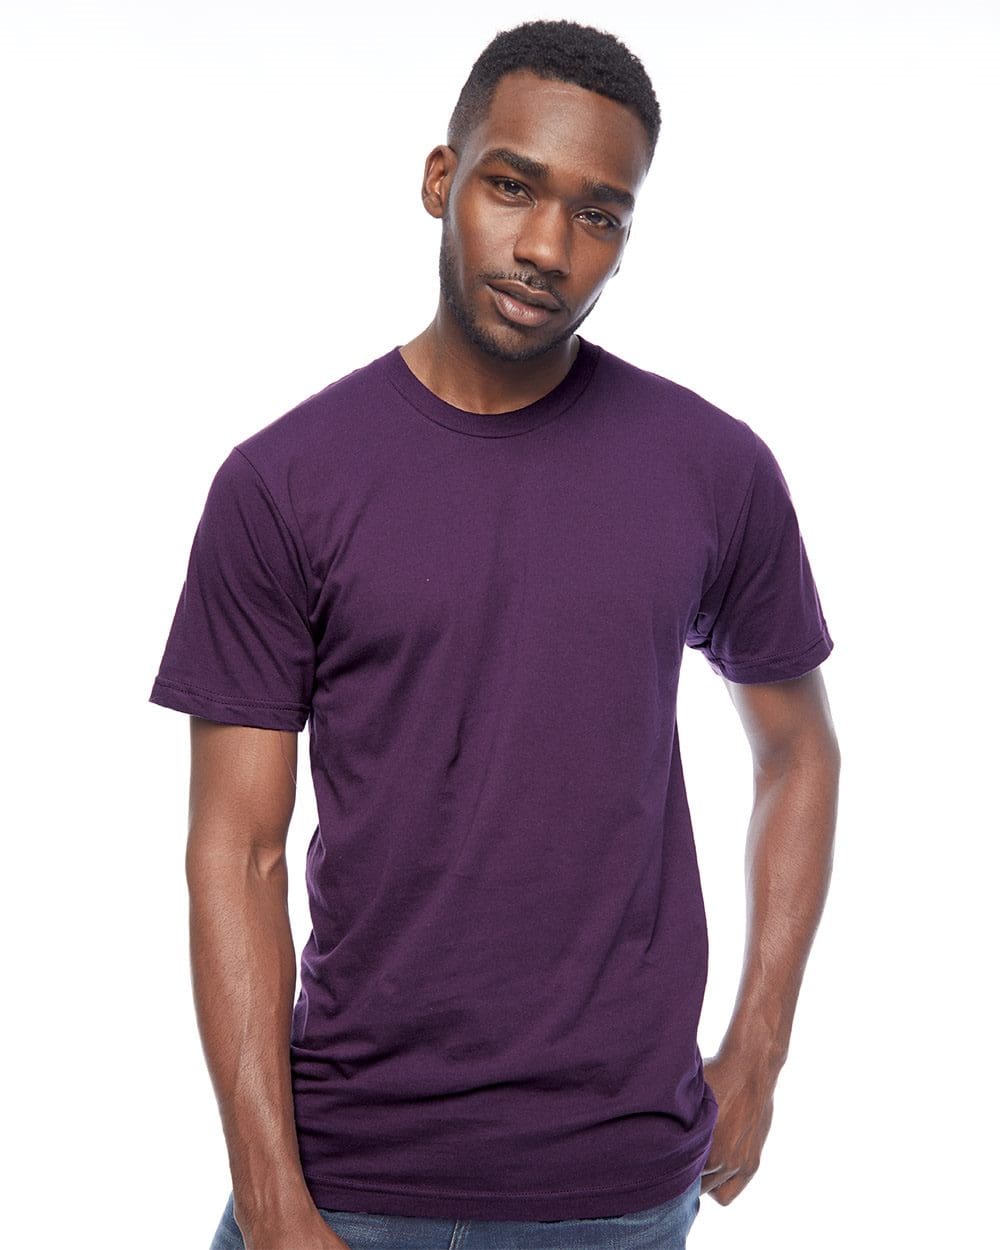 American Apparel Fine Jersey Tee for embroidery or screen print at Black Fish  Clothing